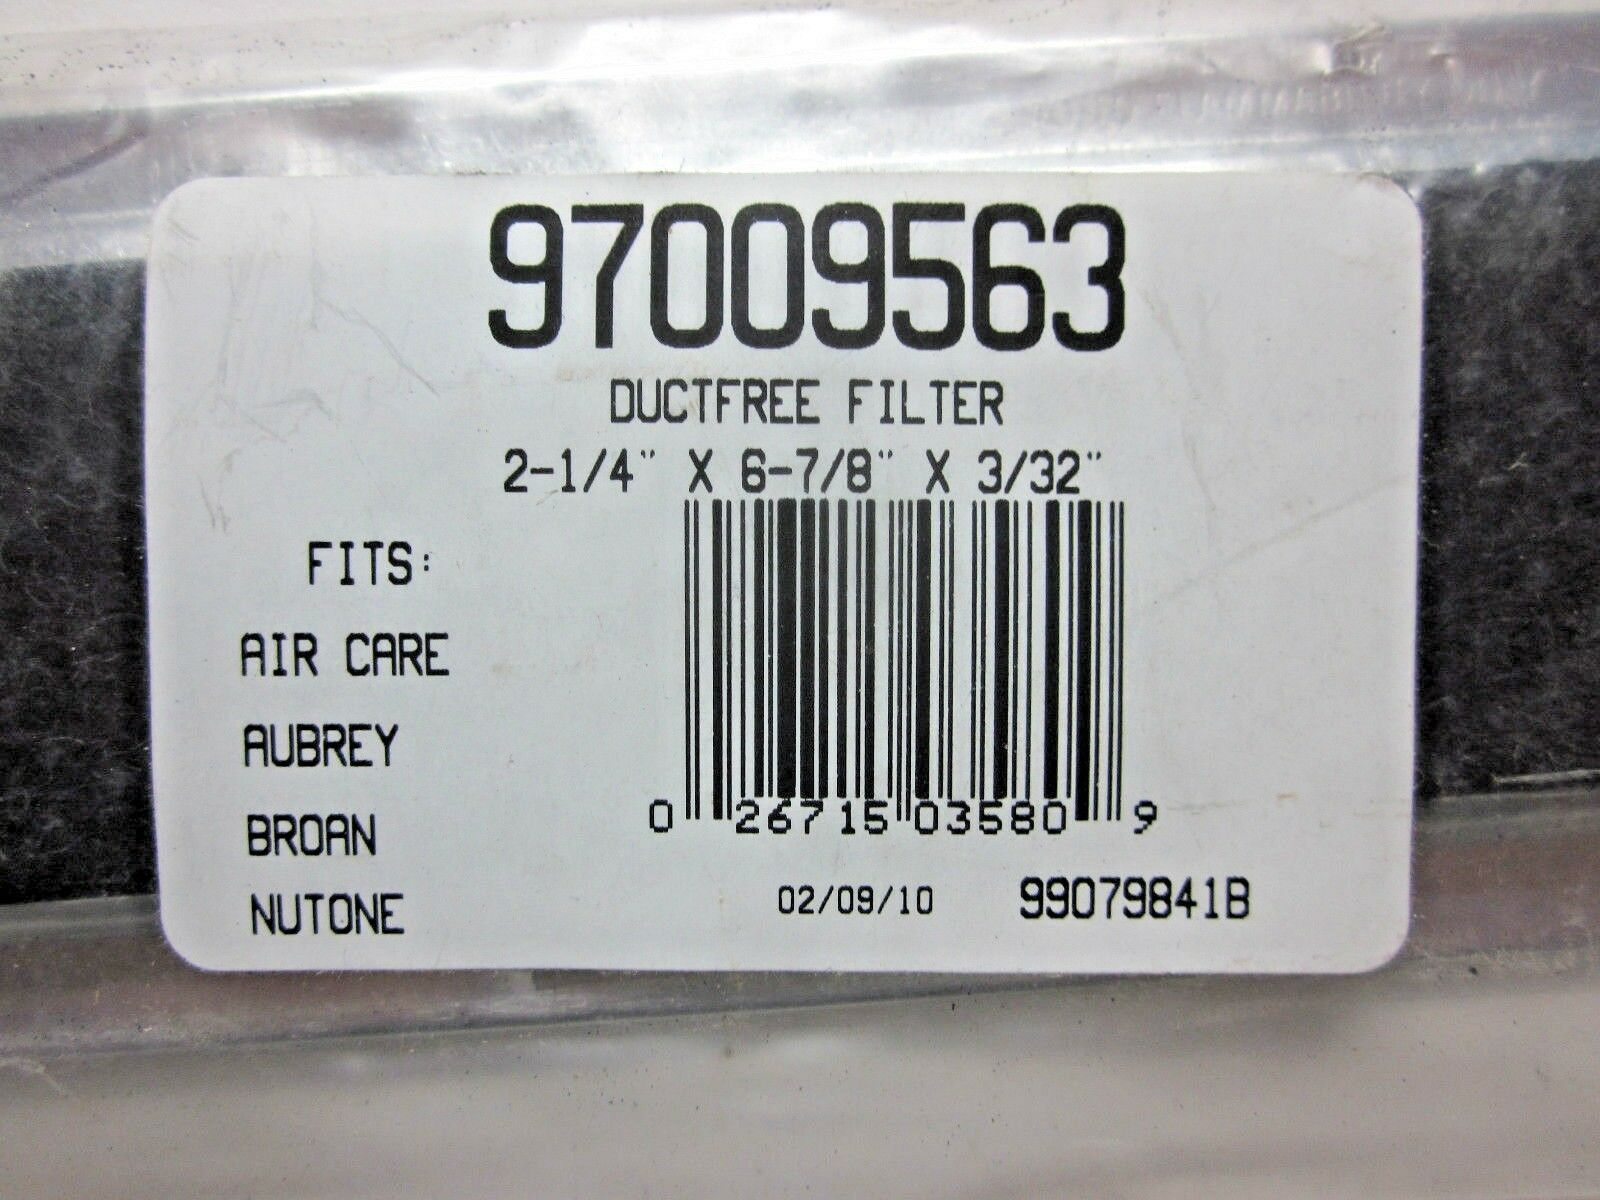 Duct Free Replacement Fan Filter 97009563 682 Air Care Aubrey Broan Nutone 1 Ea throughout size 1600 X 1200